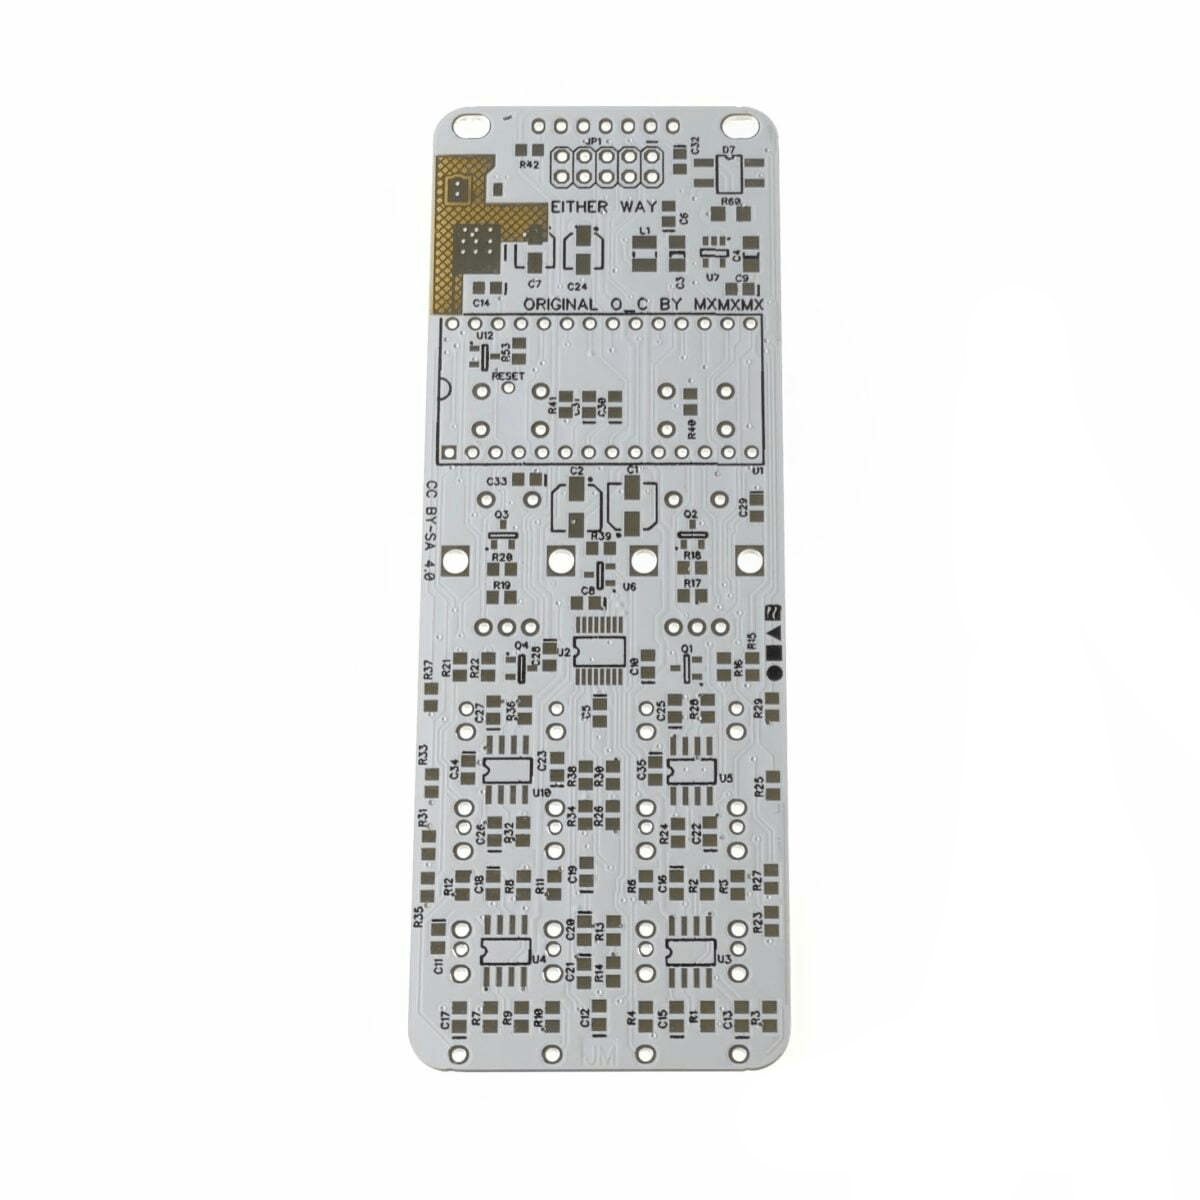 uO_C Micro Ornament and Crime PCB v1.1 on a white background